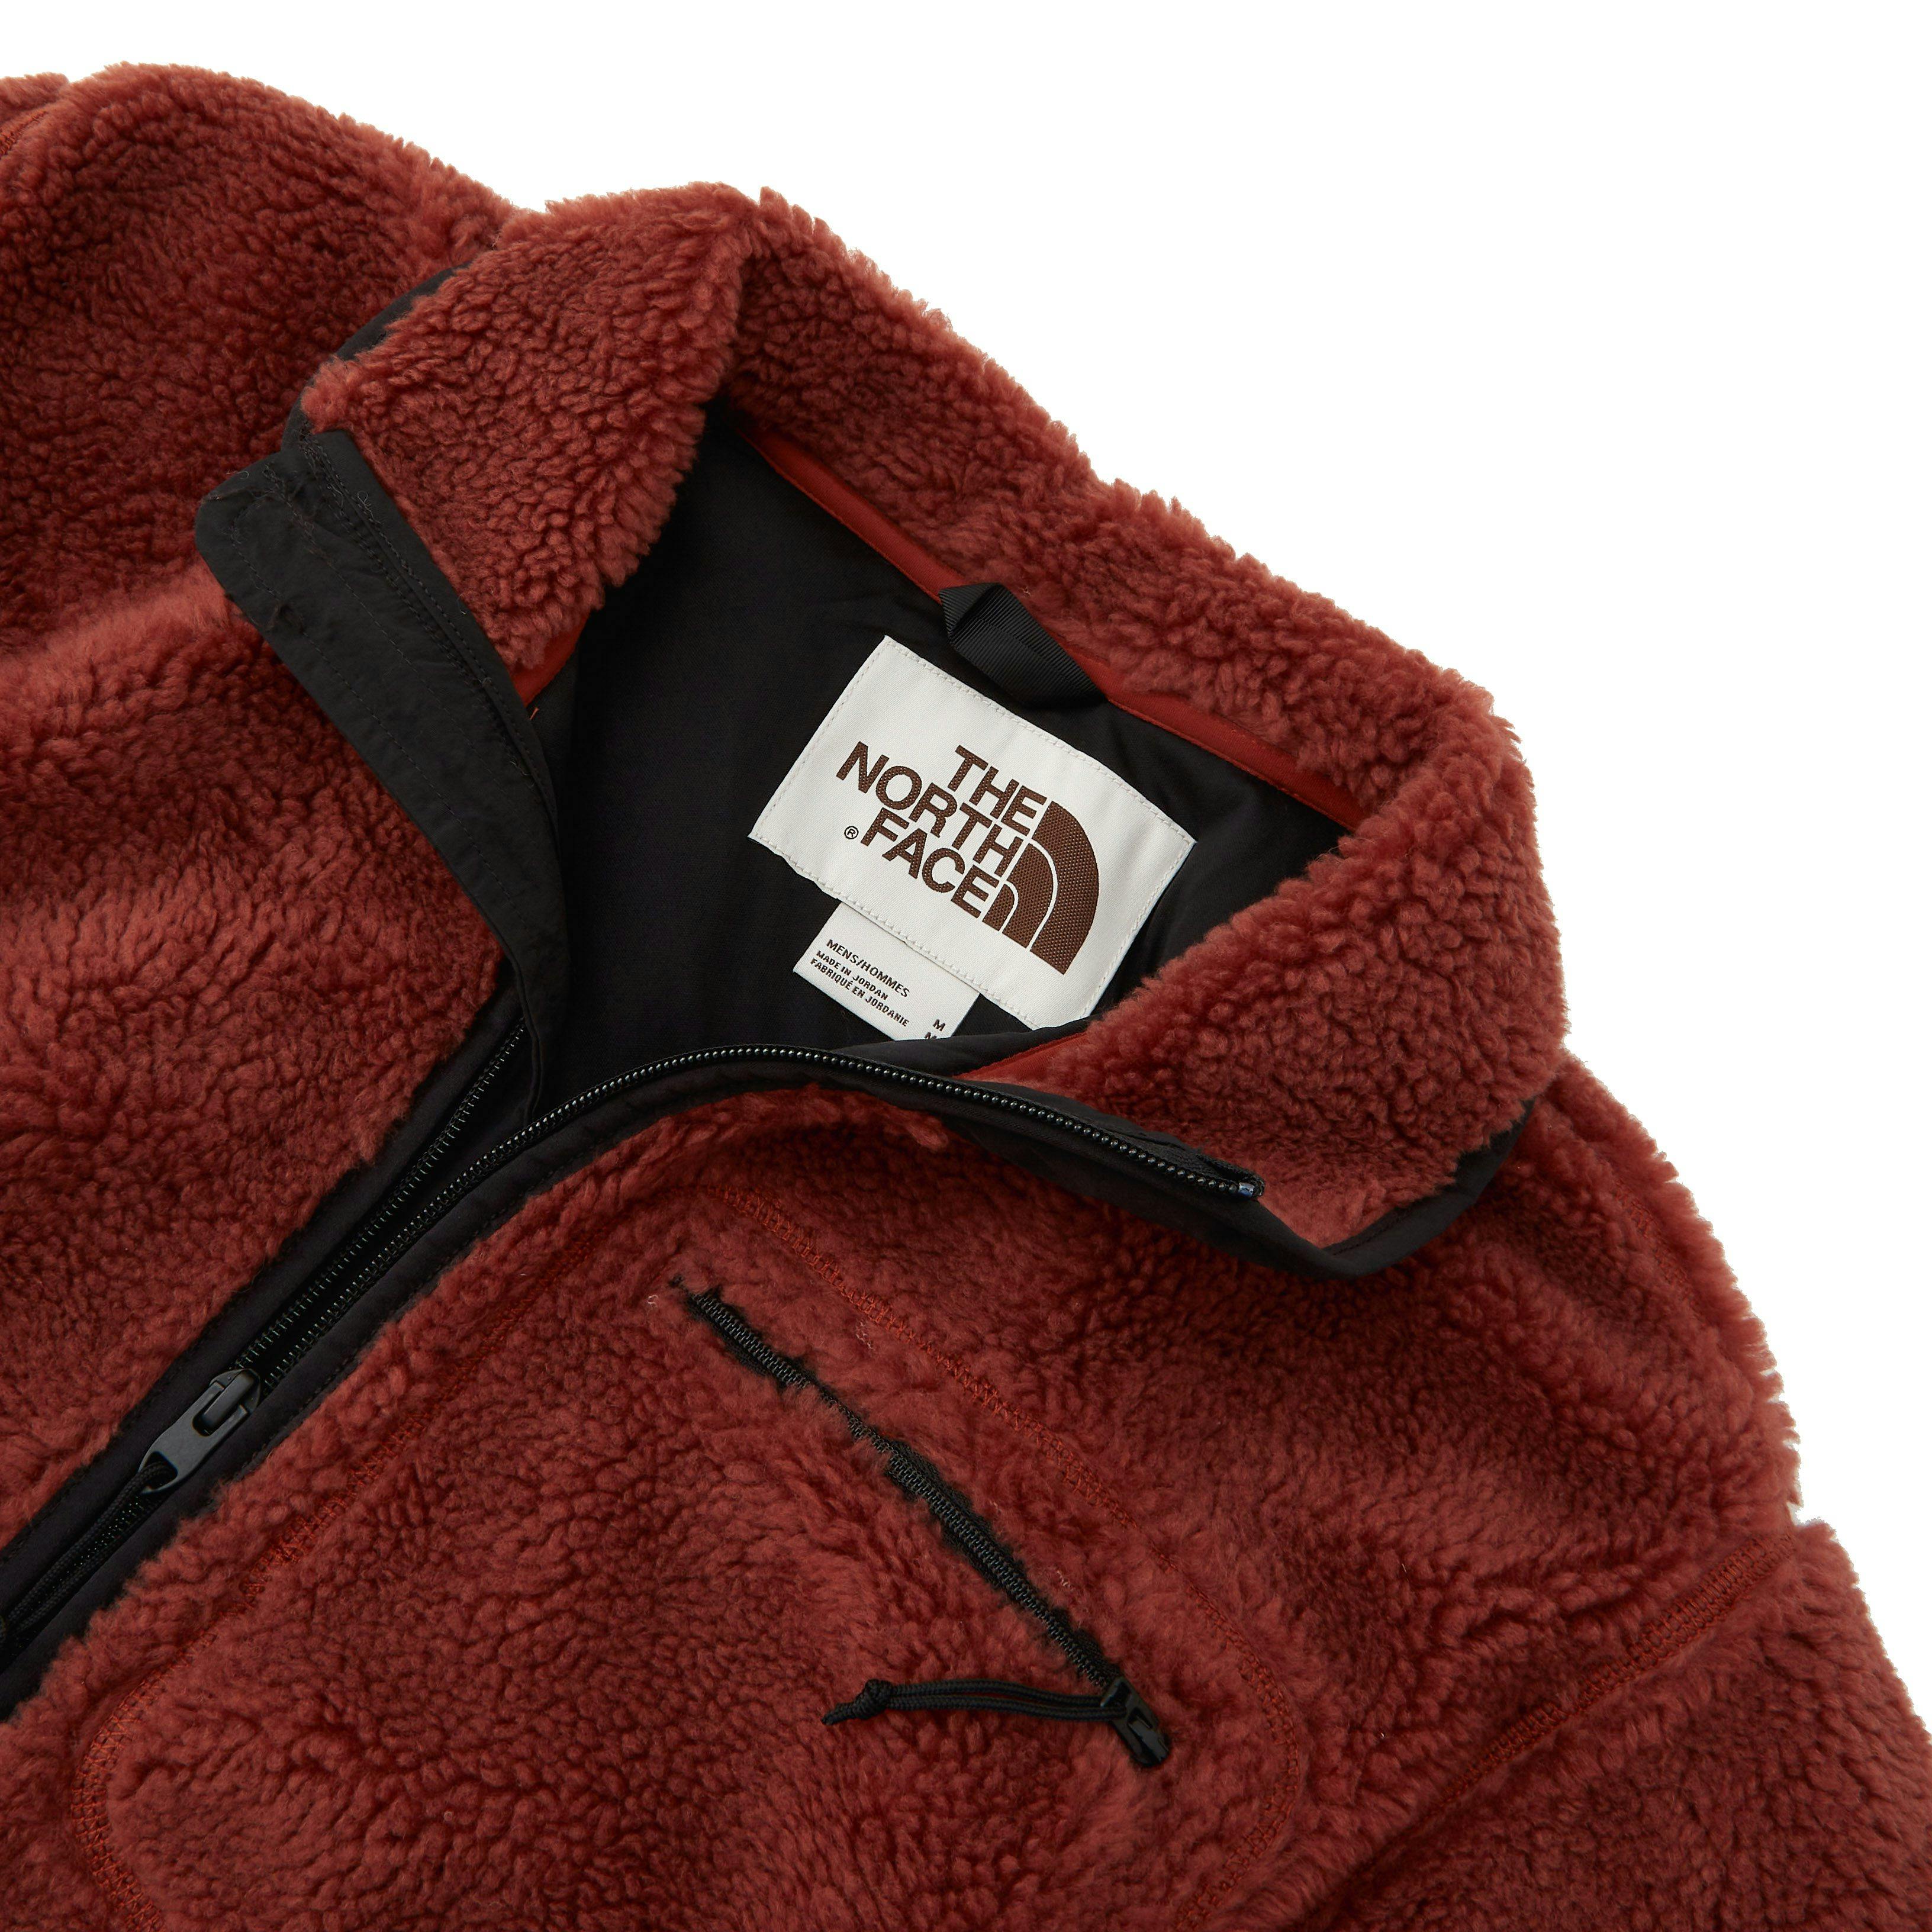 The North Face Extreme Pile Fleece Jacket